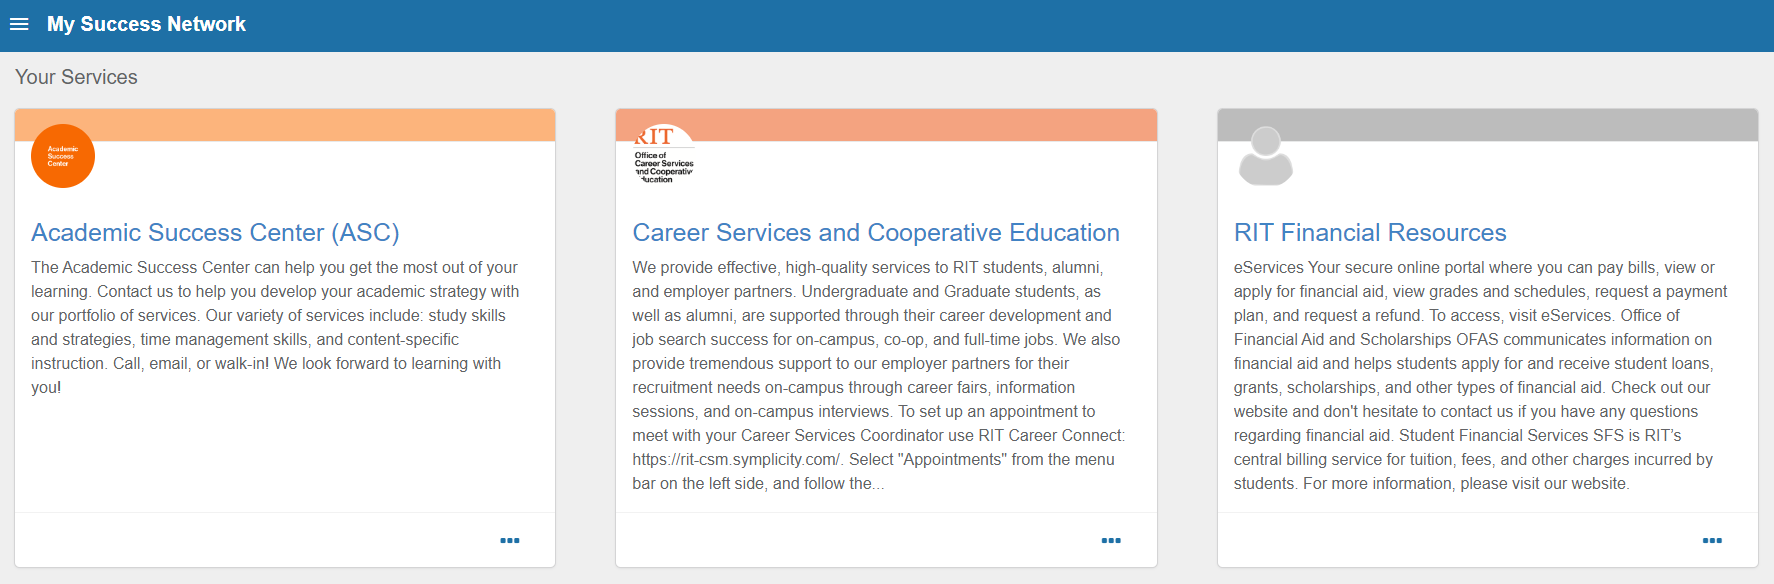 There is a blue banner at the top with the hamburger button and text “My Success Network” next to it. Below that, there is the heading “Your Services” which has three boxes below it for the Academic Success Center, Career Services and Cooperative Education, and RIT Financial Resources. In each box, there is a description of each office as well as a circle with the logo of the service. In the bottom right corner of each box is an ellipsis button.